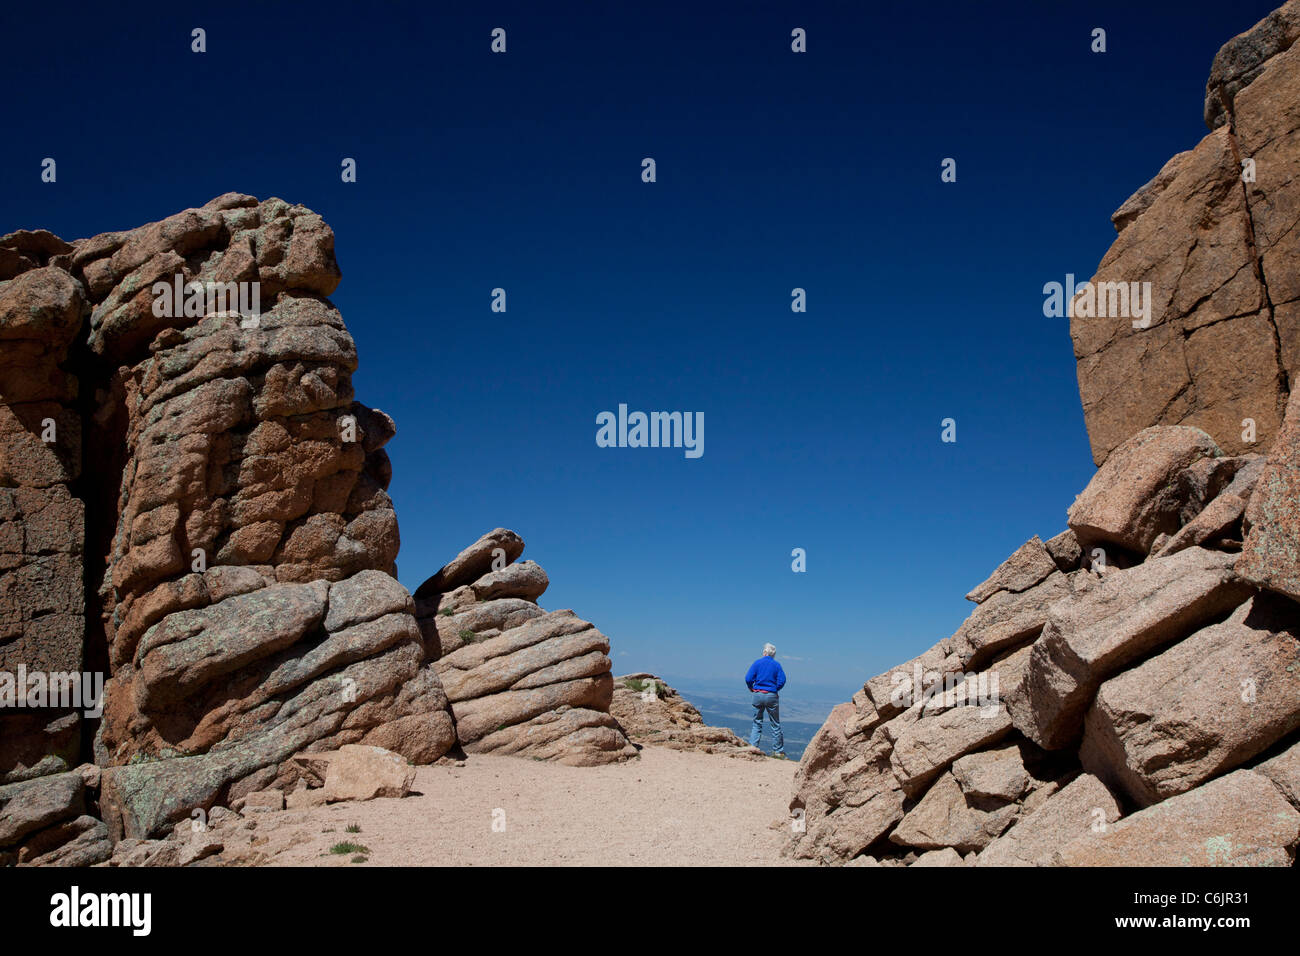 Colorado Springs, Colorado - Susan Newell, 62, hikes on a trail near the summit of Pikes Peak. MR Stock Photo